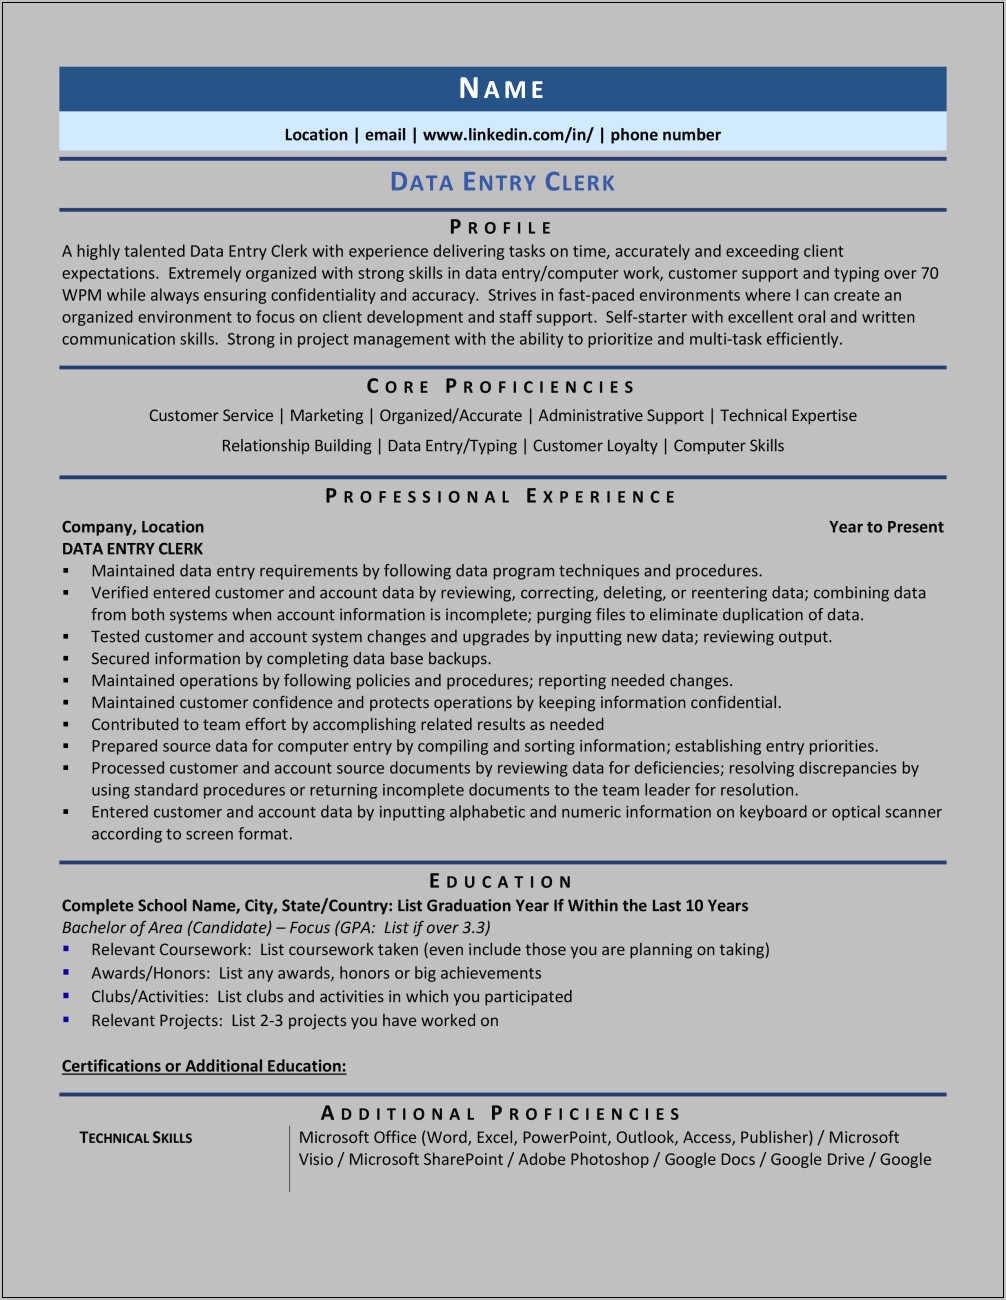 Resume Suggestions For Remote Jobs